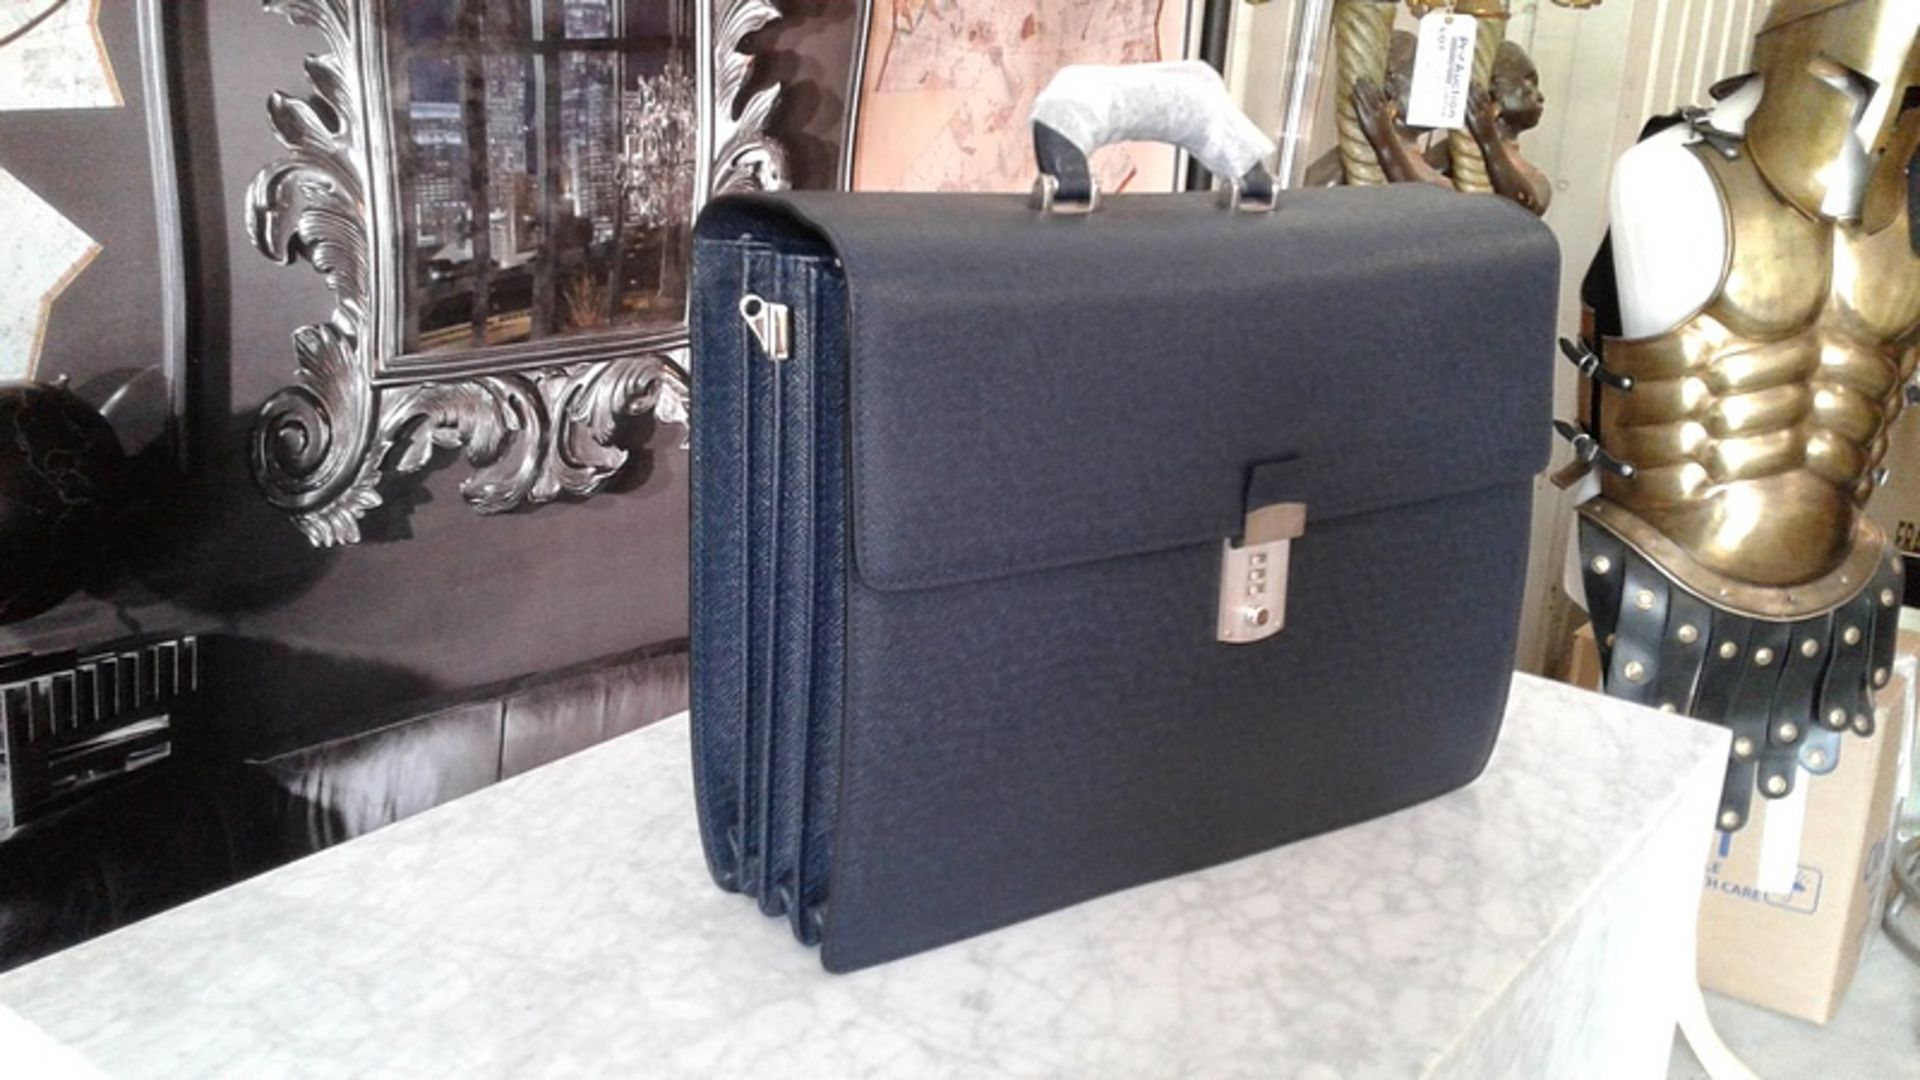 Executive Briefcase 100% GRAINED SLALOM LEATHER FOR BODY AND DETAILS 100% COTTON SATEEN LINING Navy